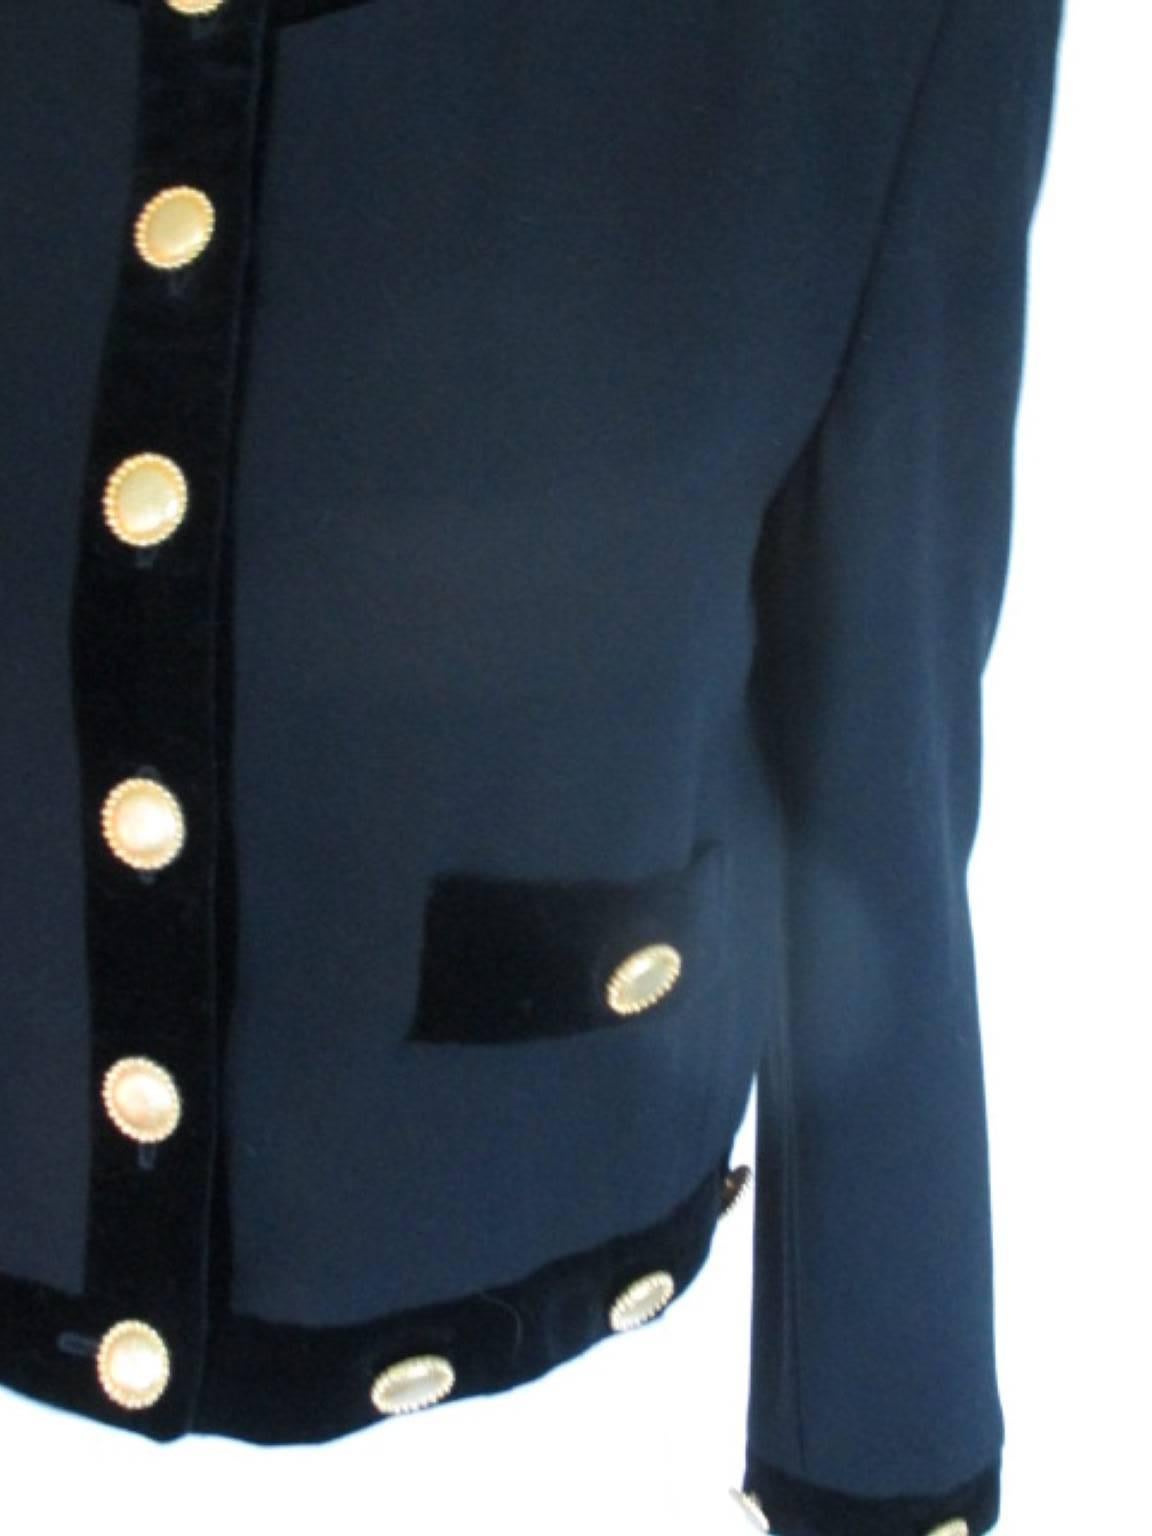 This item with a Chanel look is made of 100% wool trimmed with black velvet and gold colored buttons.
Its in excellent condition.
Size is german 38